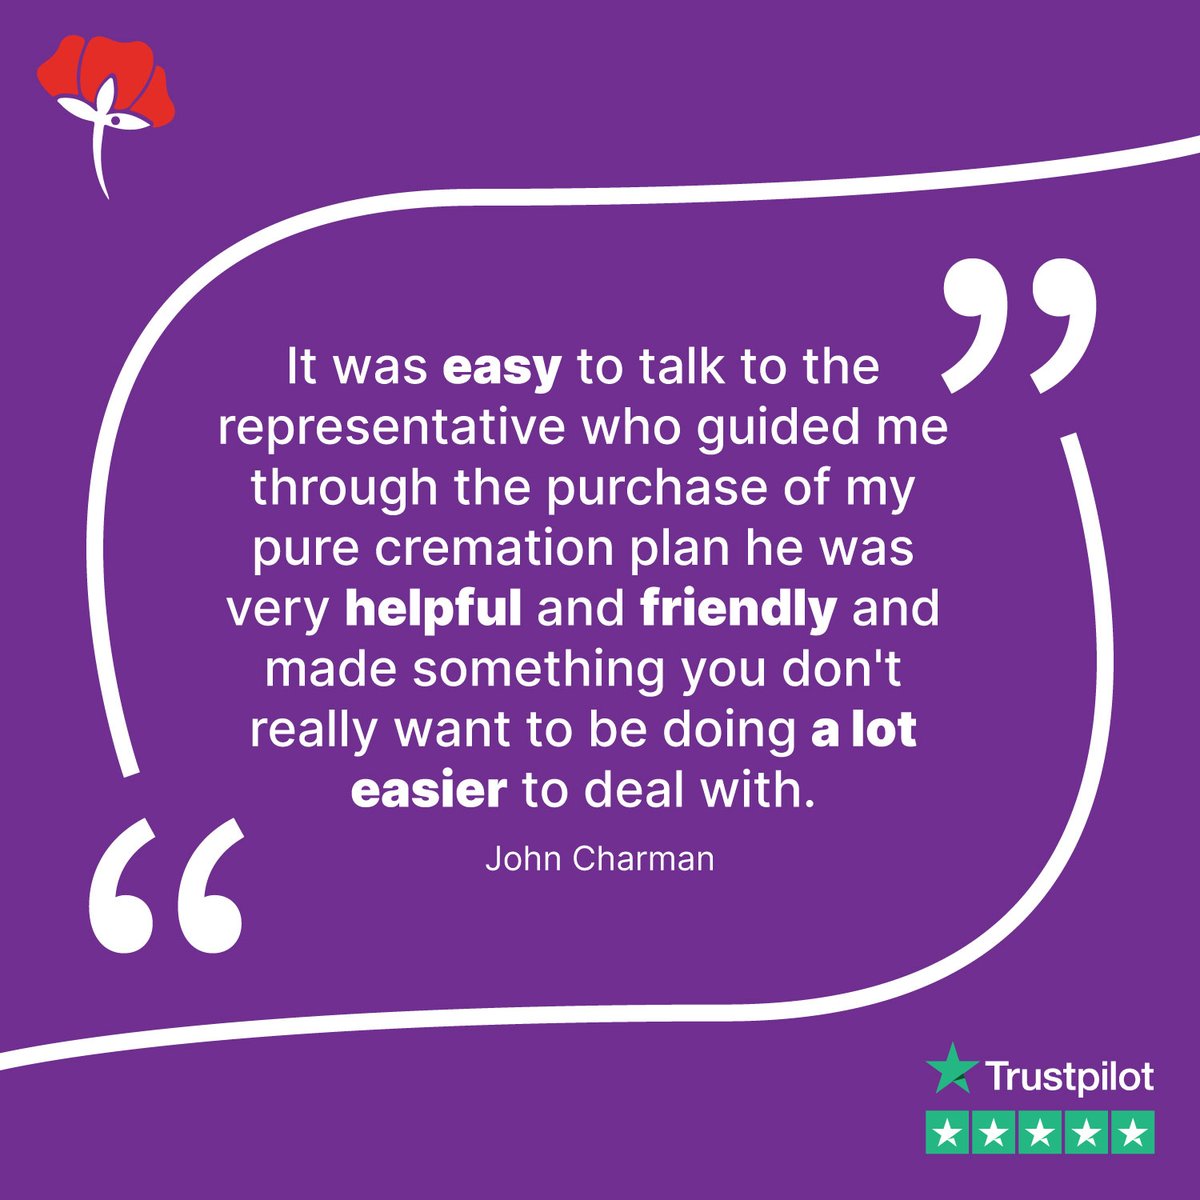 Ease and friendliness make all the difference in such delicate matters. Thank you, John, for sharing your experience with us. 🌟 #CustomerReview #Testimonial #PureCremation